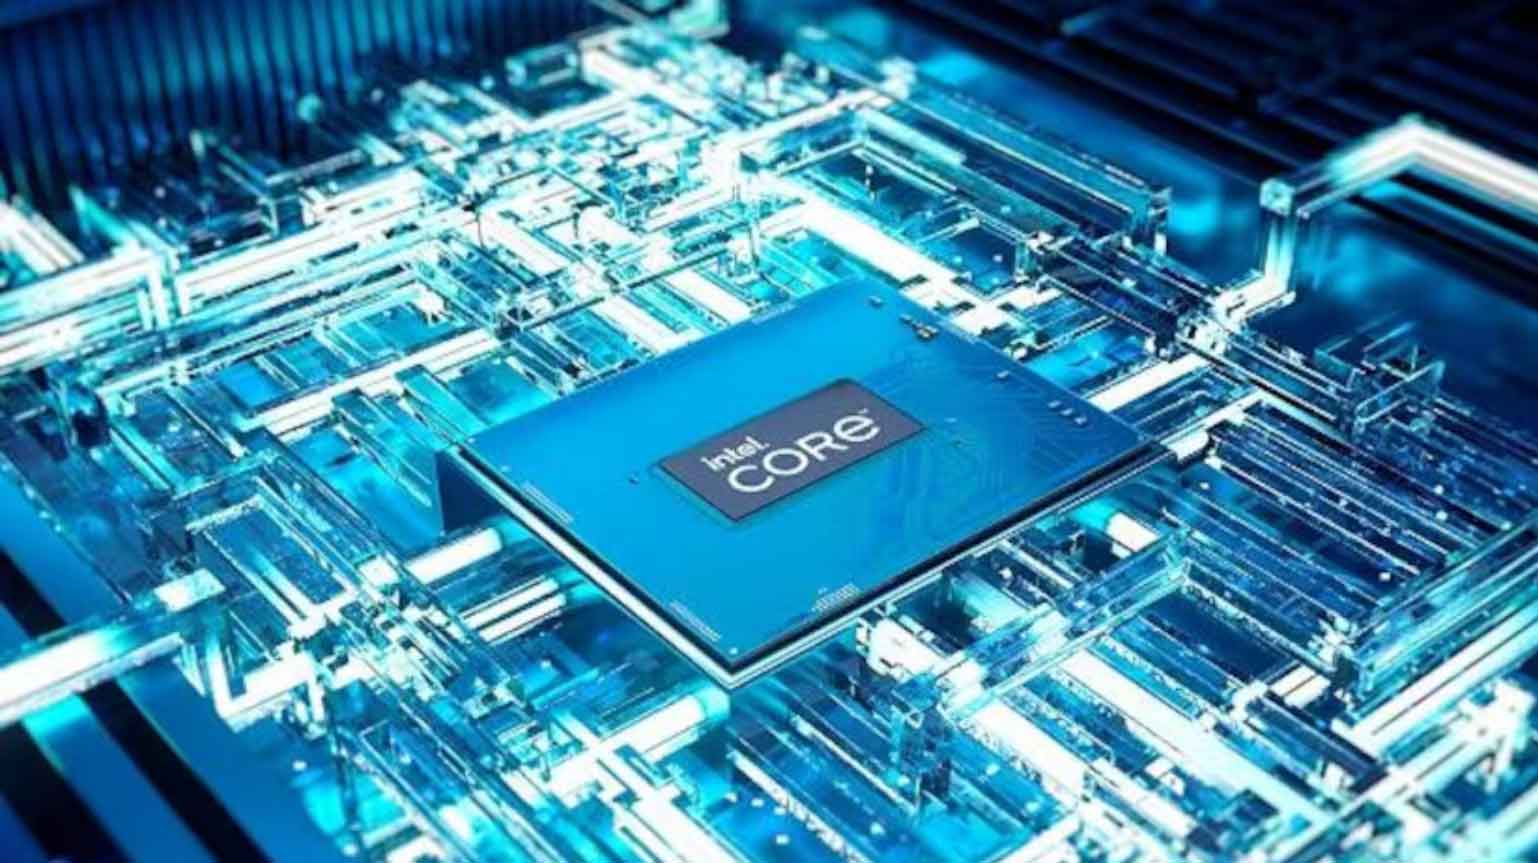 Intel Plans for 18A Chips By 2025 to Challenge Samsung, TSMC Dominance